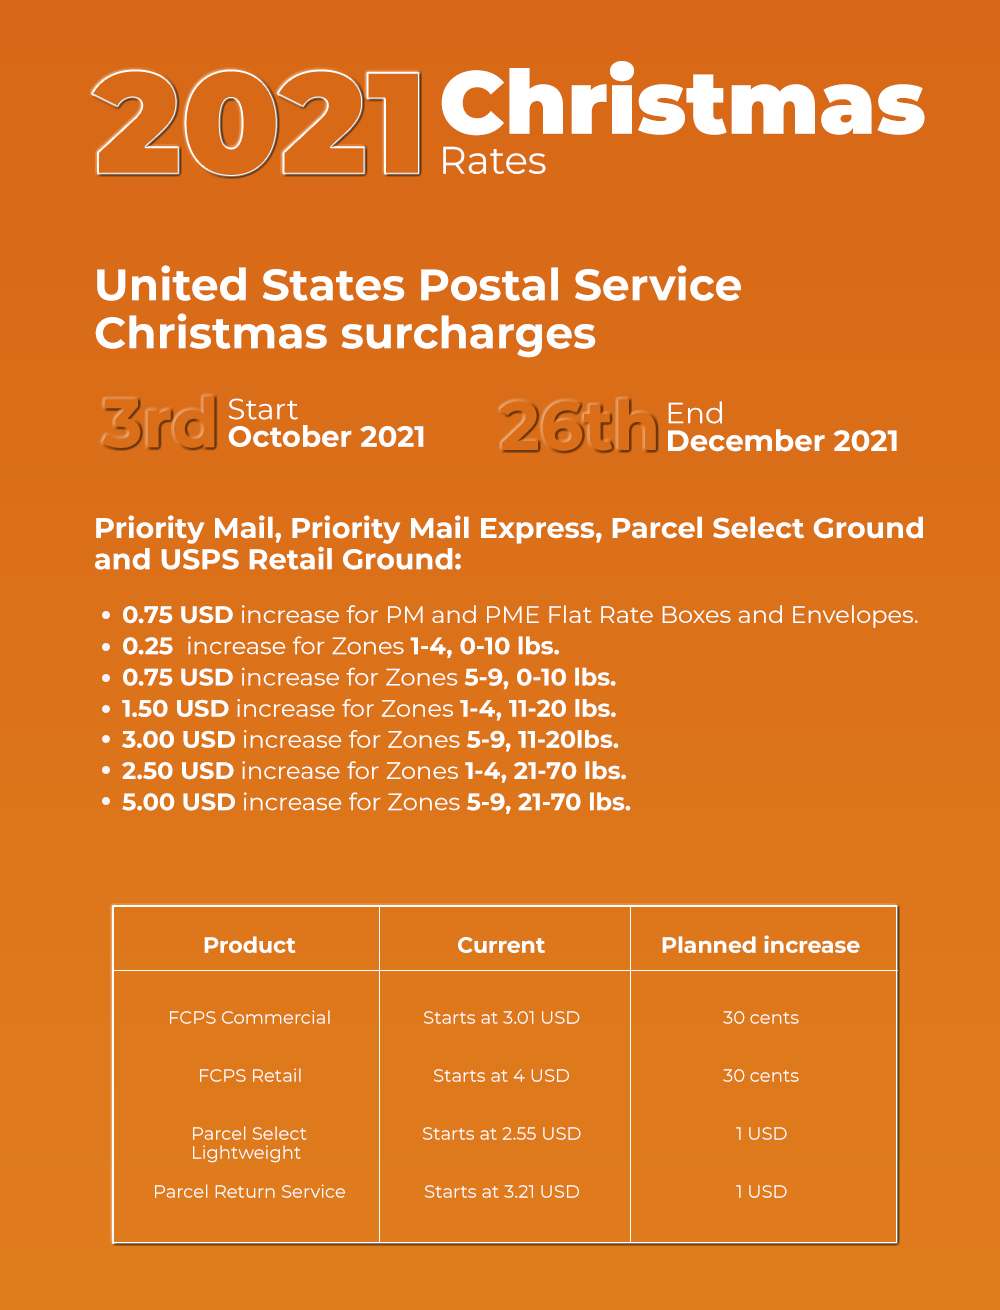 Rates over the Christmas period in 2021